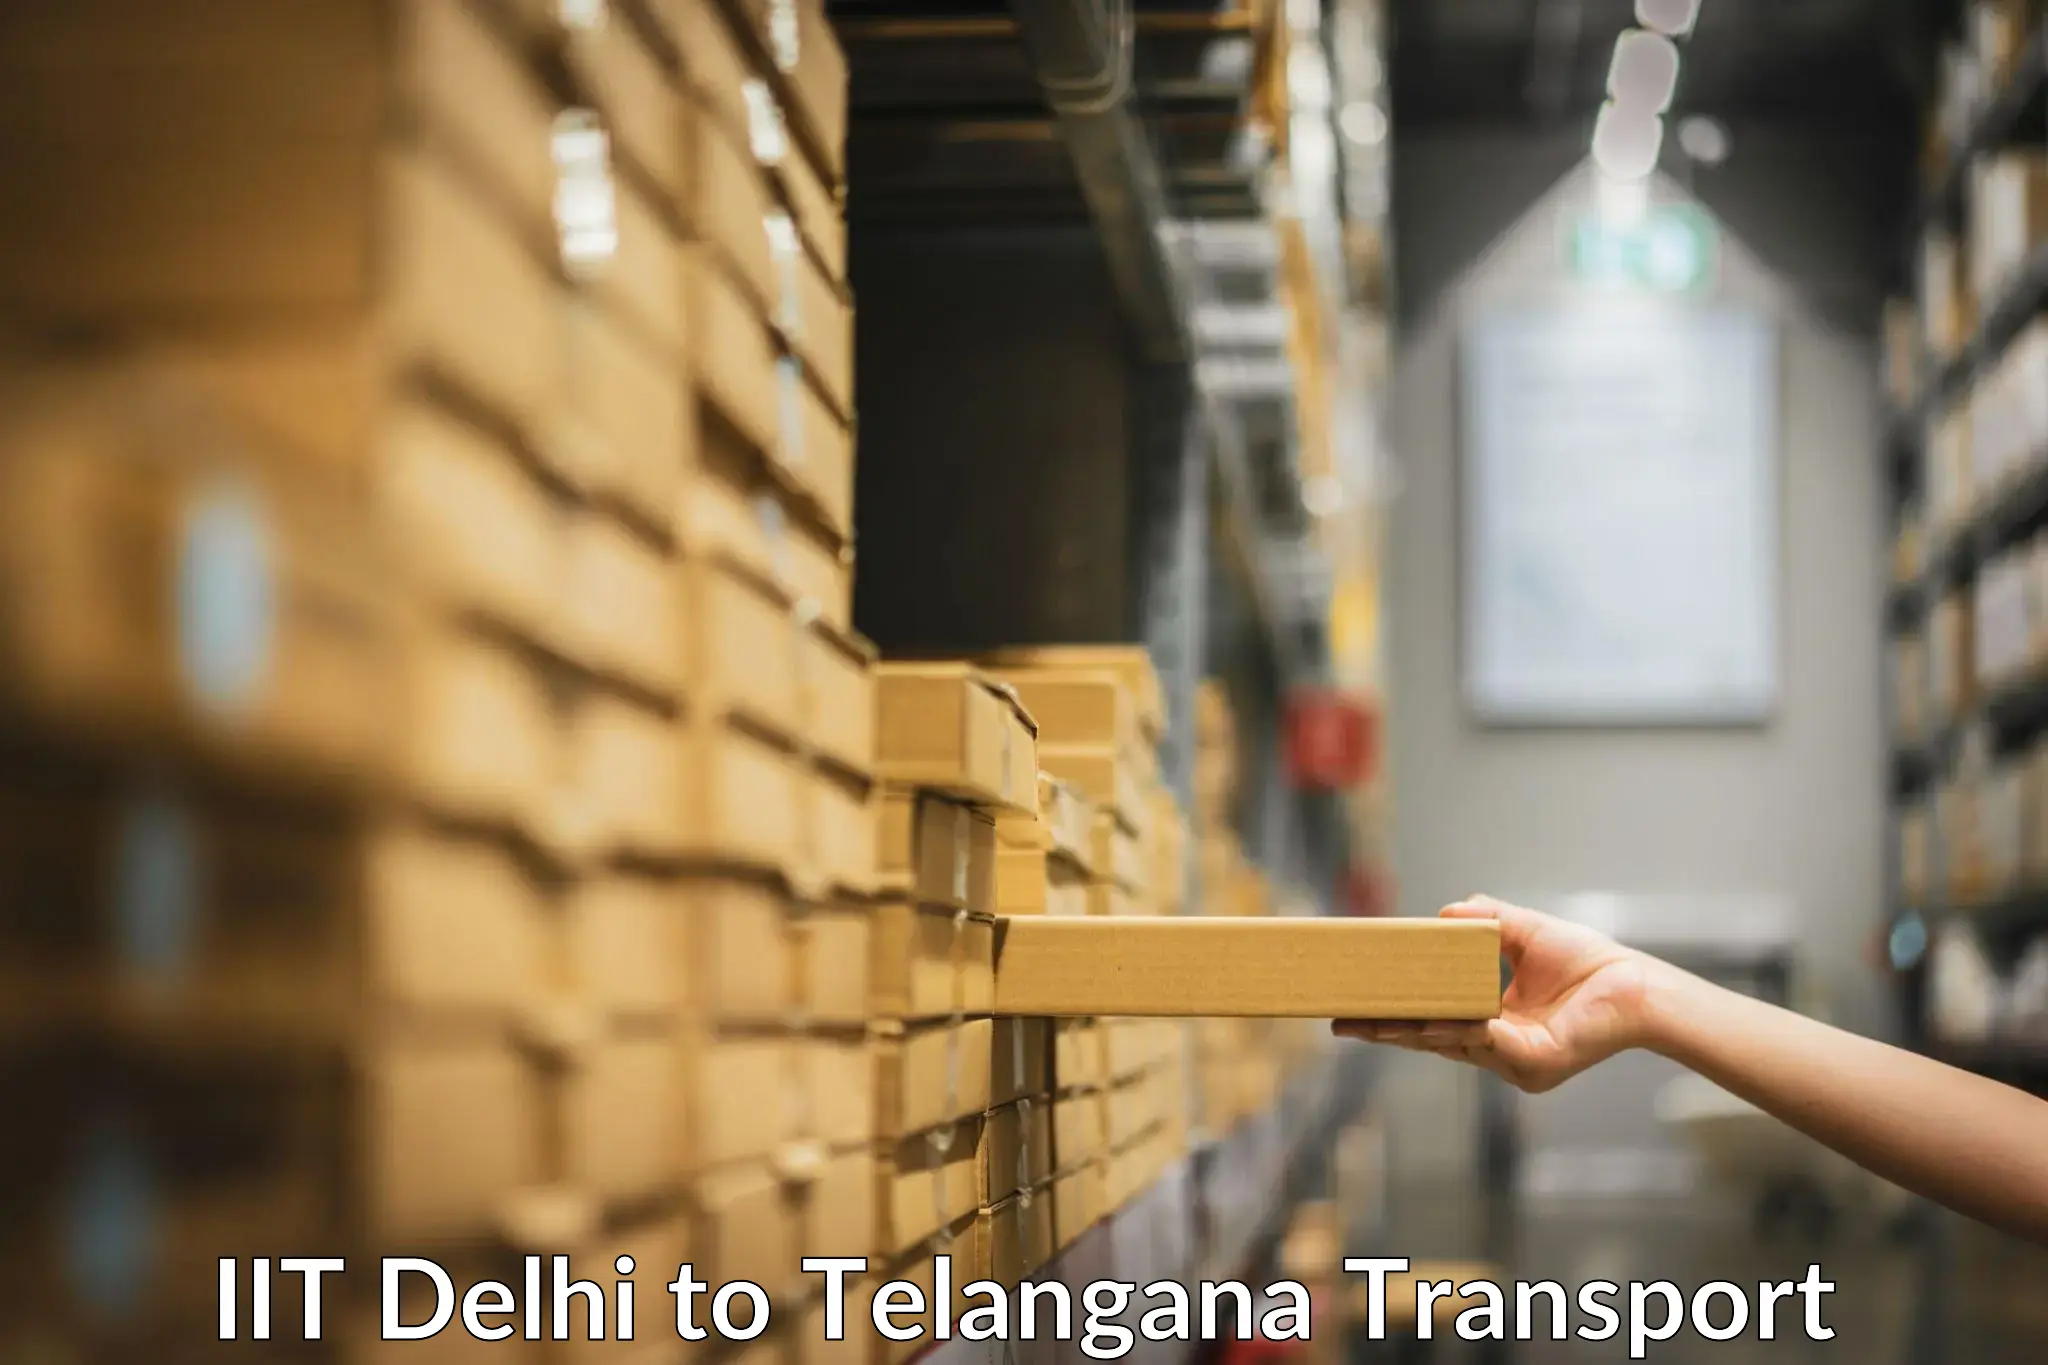 Container transport service IIT Delhi to Mahabubabad